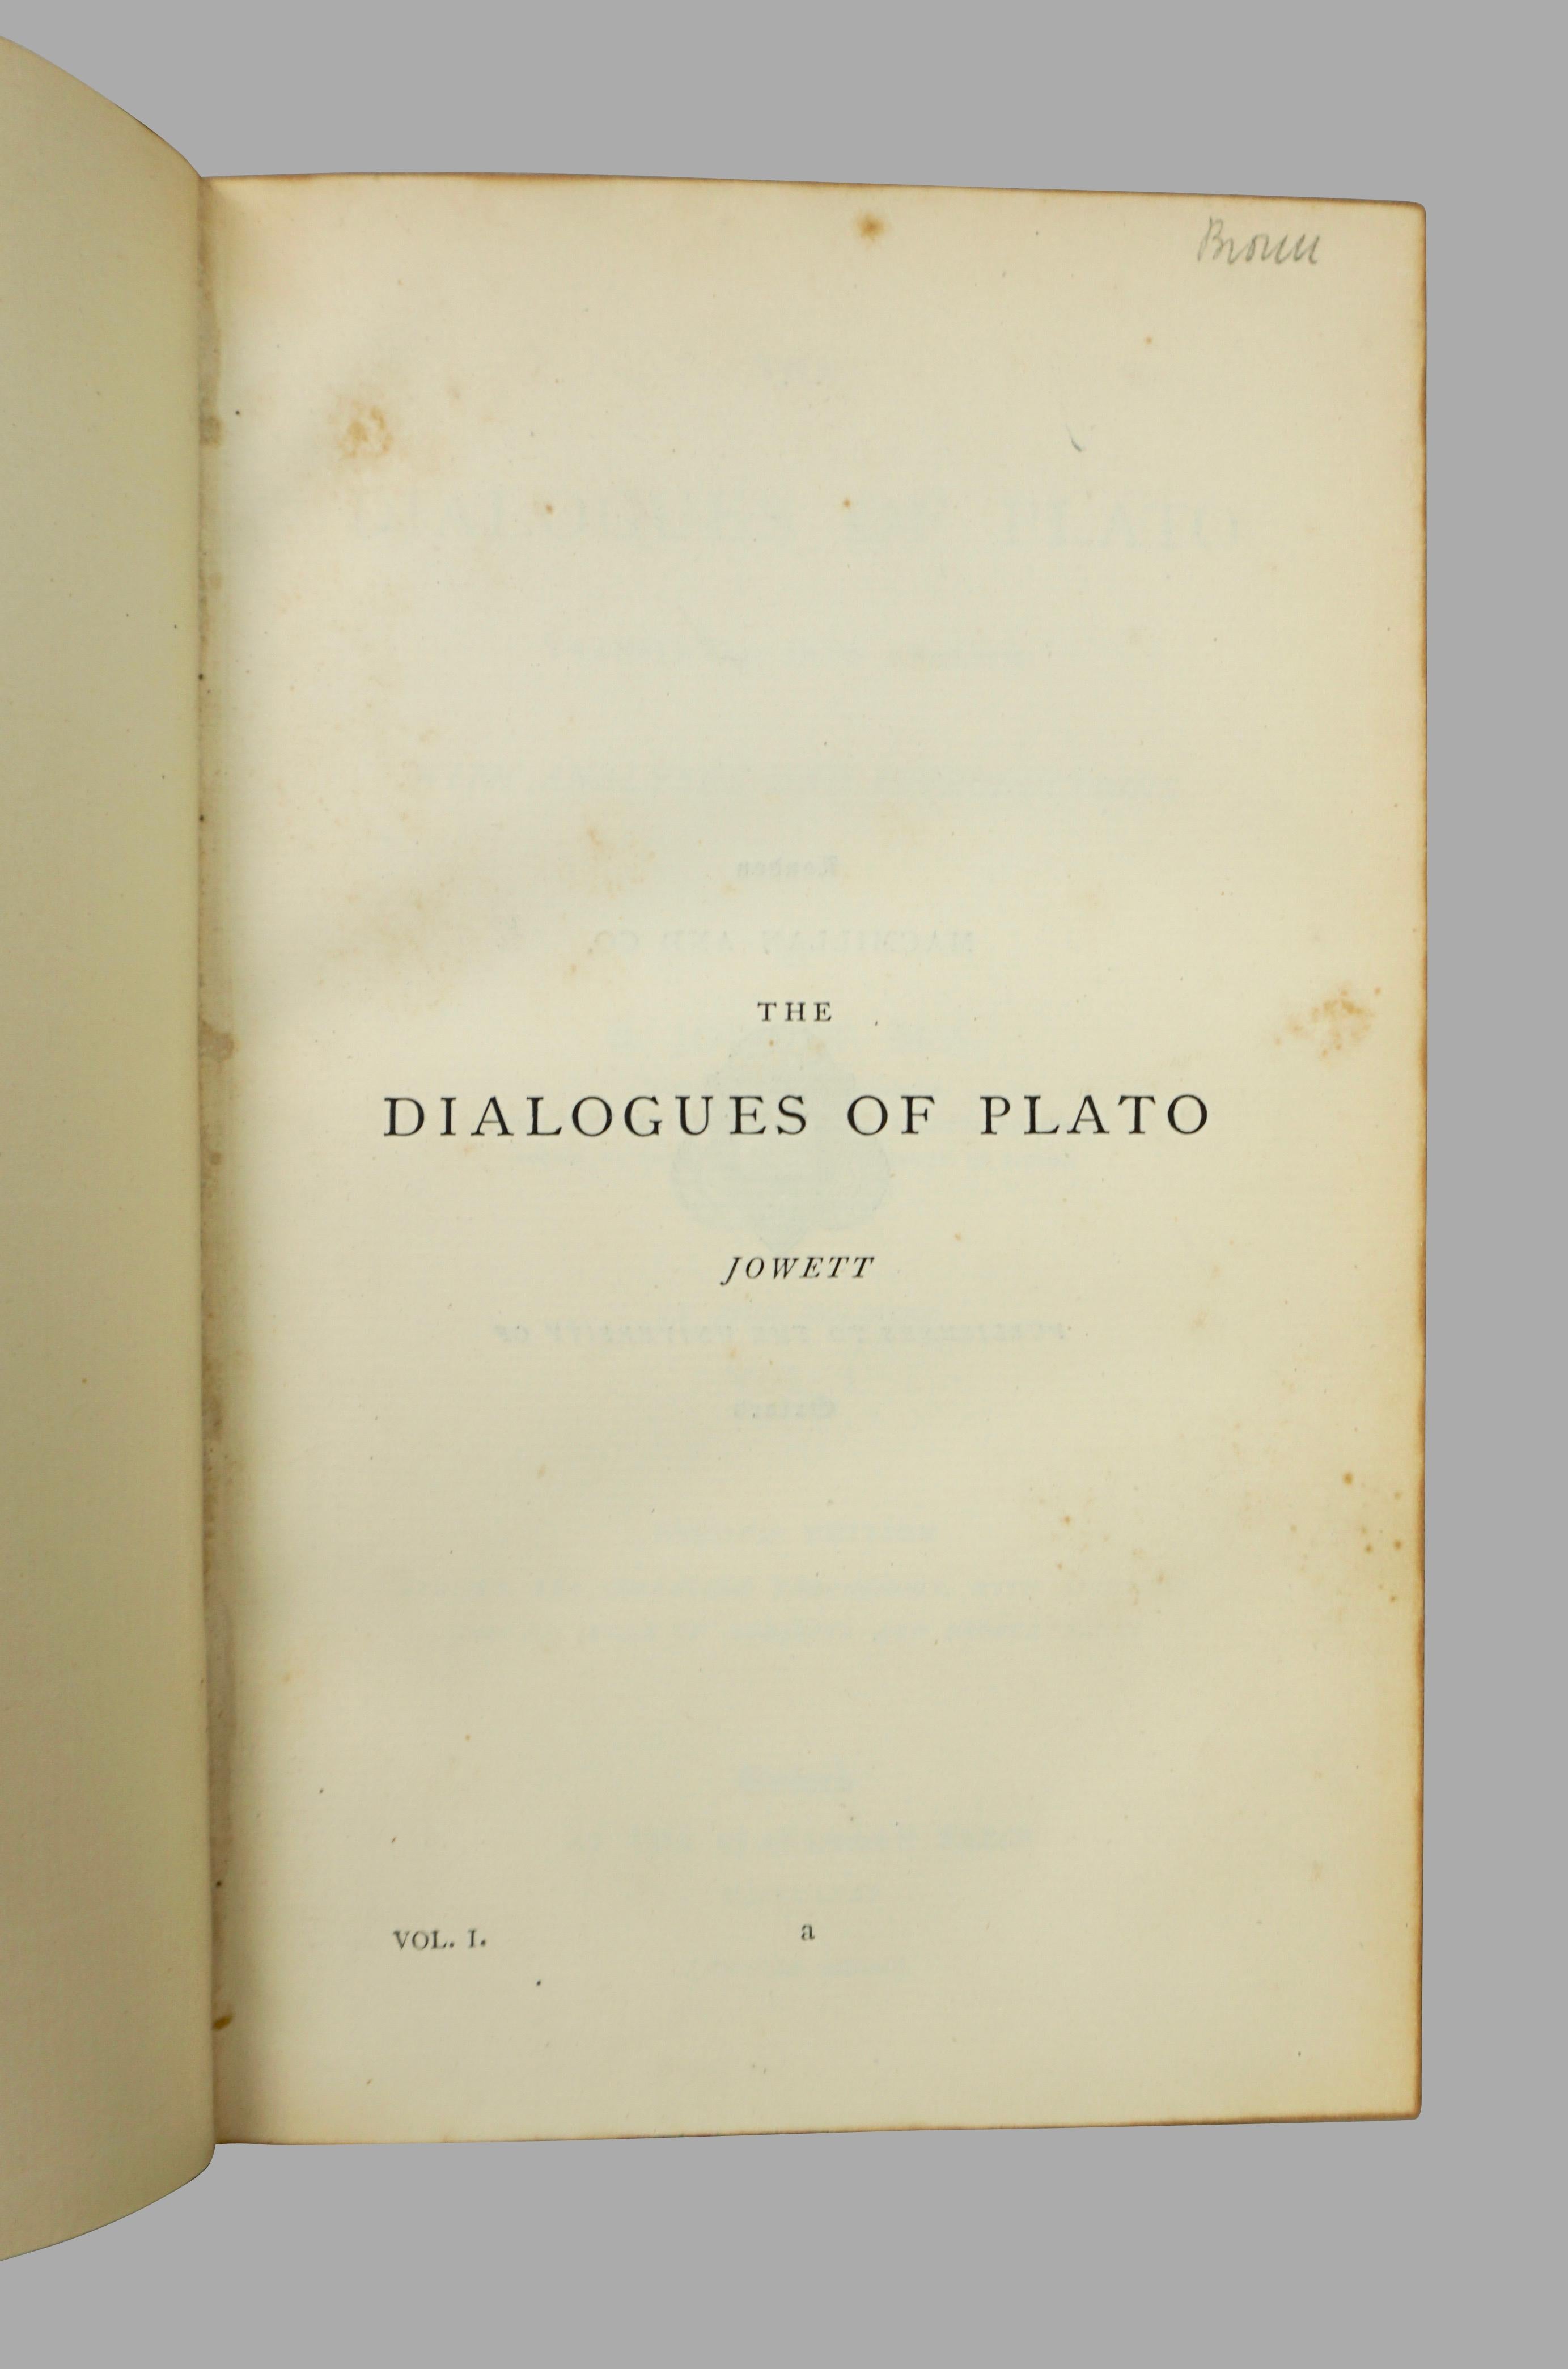 The Dialogues of Plato in 5 Elegant Full Leather Bound Volumes 2